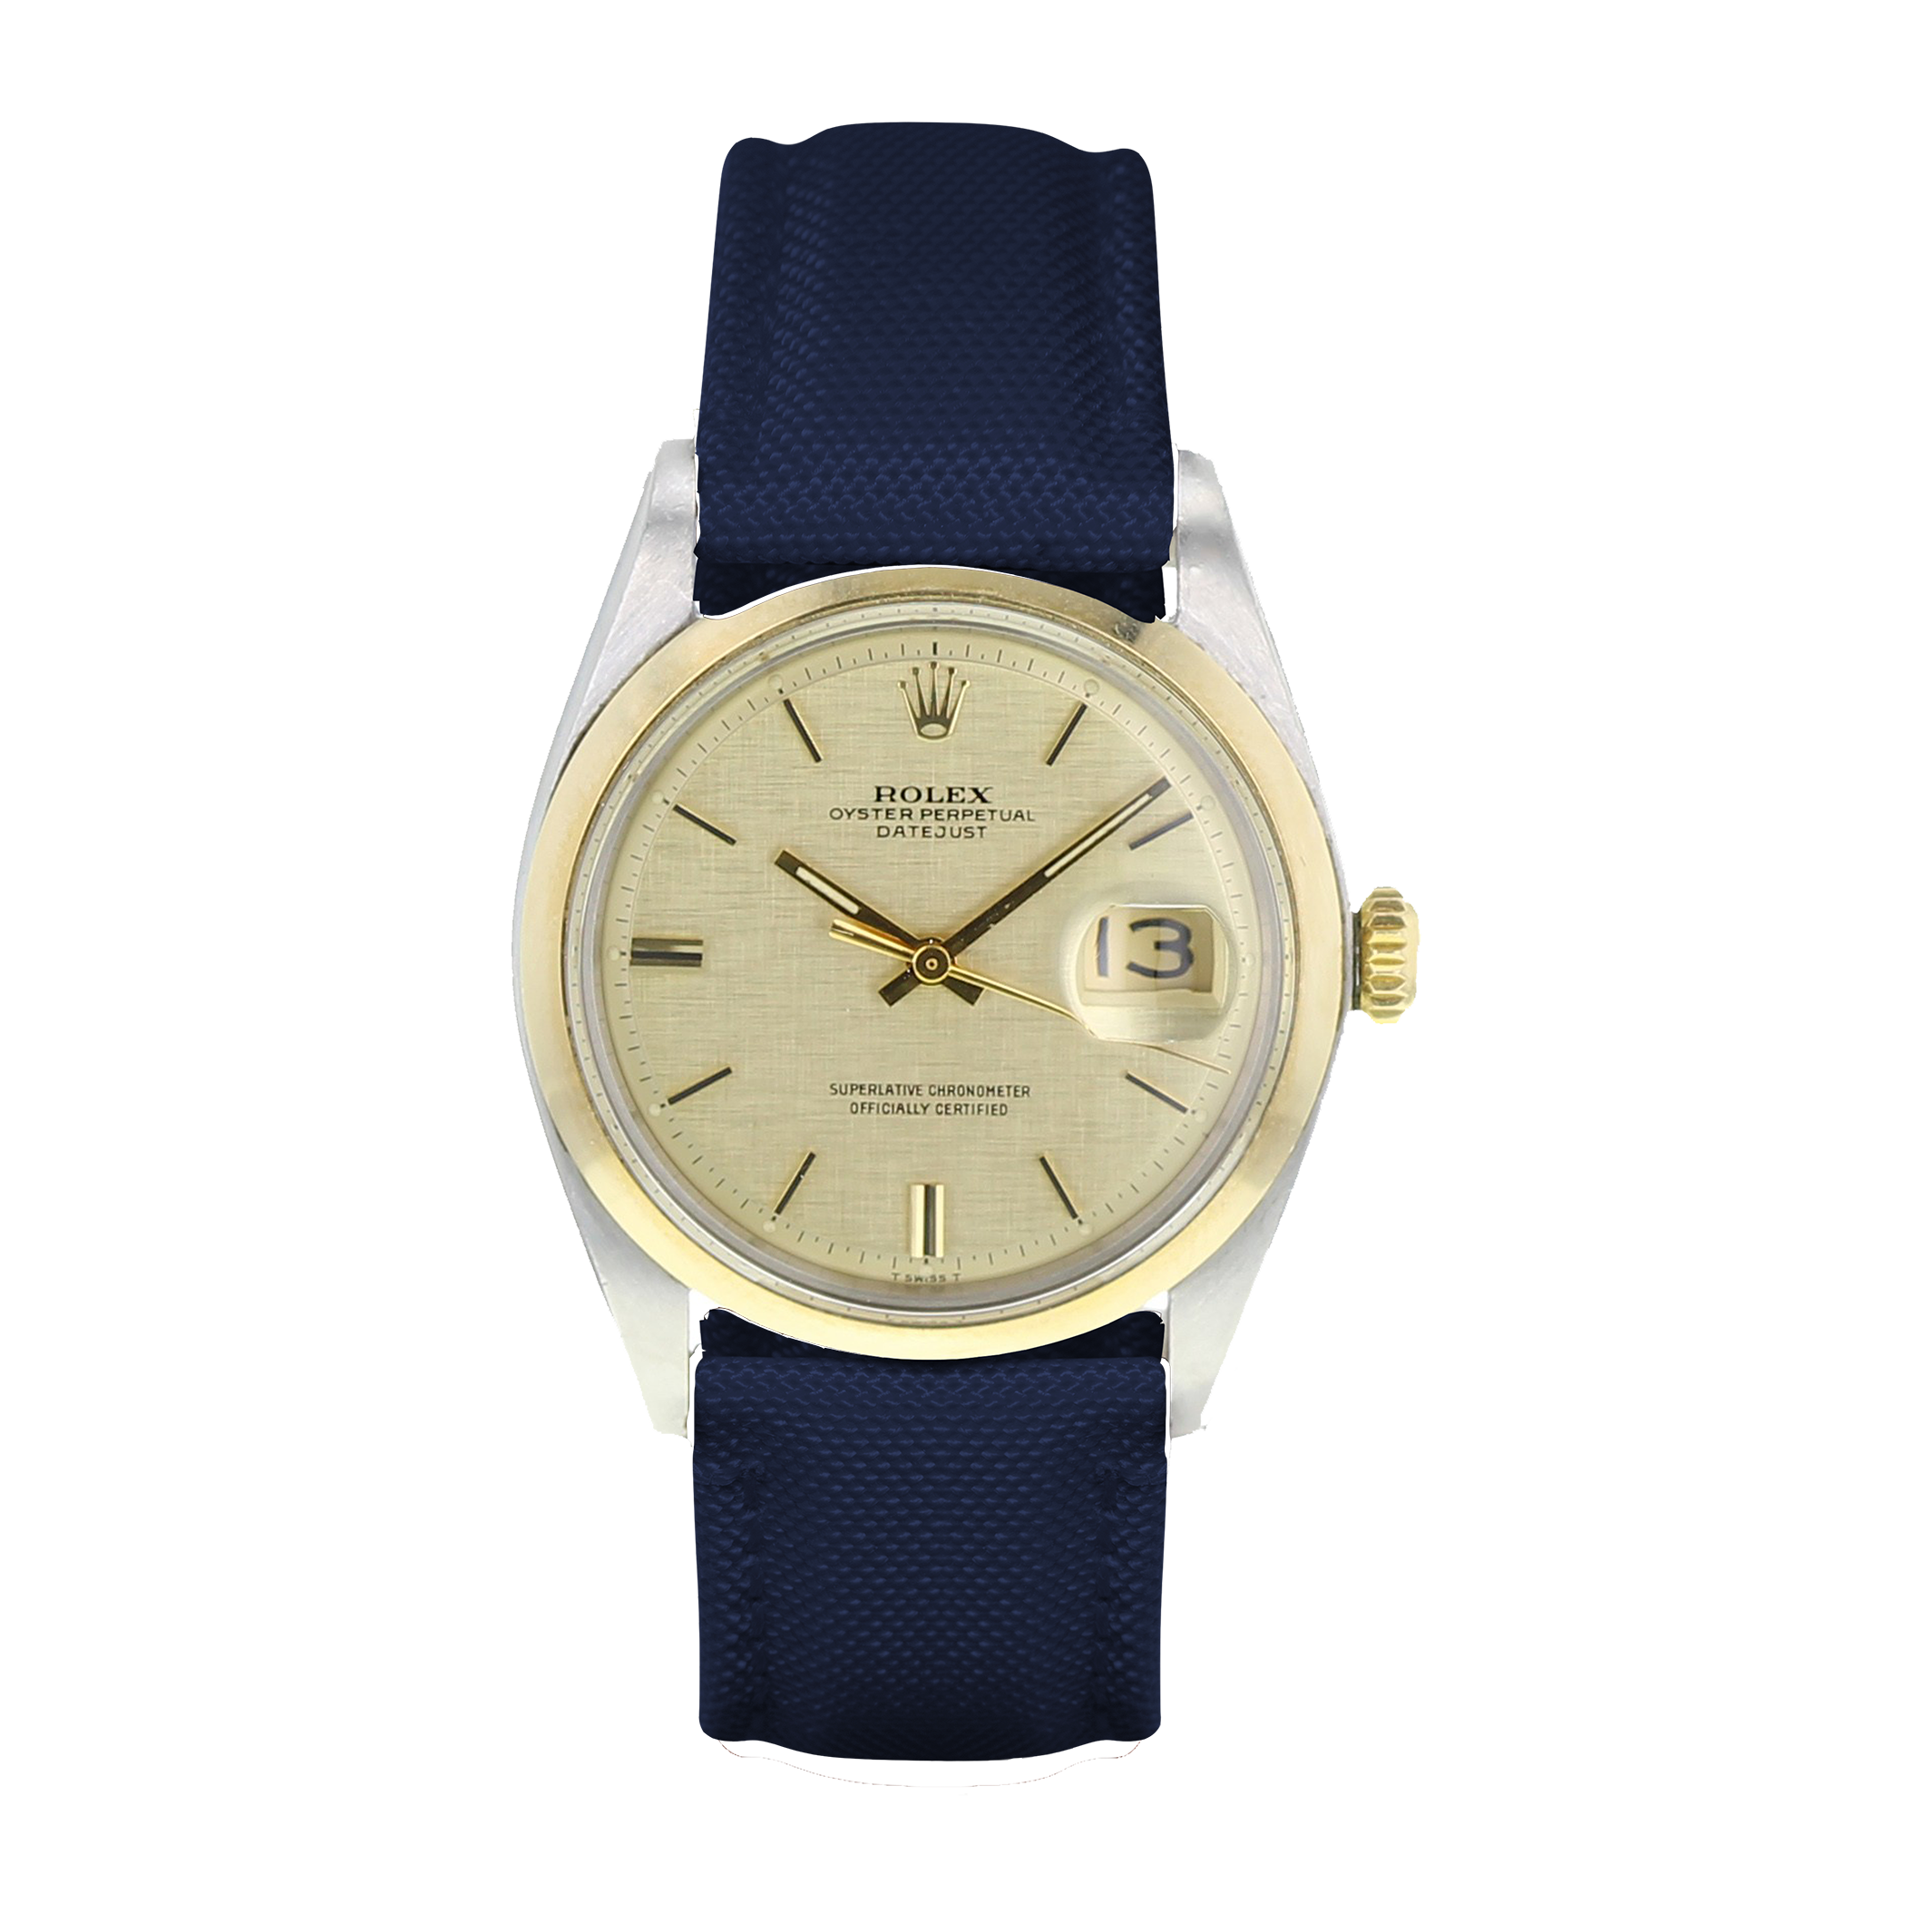 <img src="tapster.png" alt="Blue- contactless watch strap canvas on rolex watch">